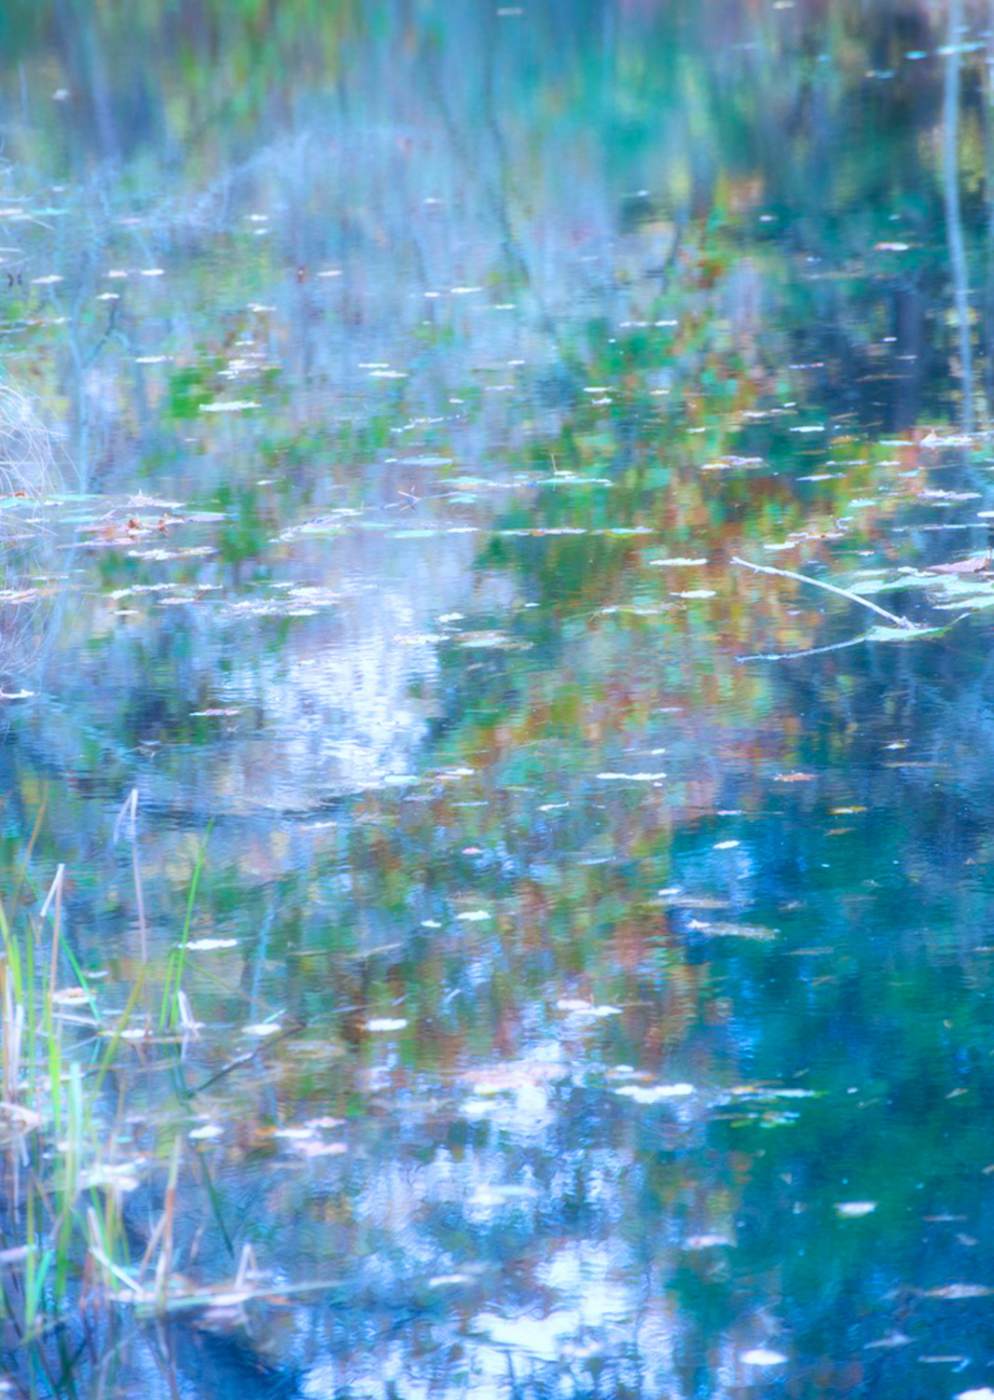 A vernal pool reflection with fairy dancing all over the water shrimp